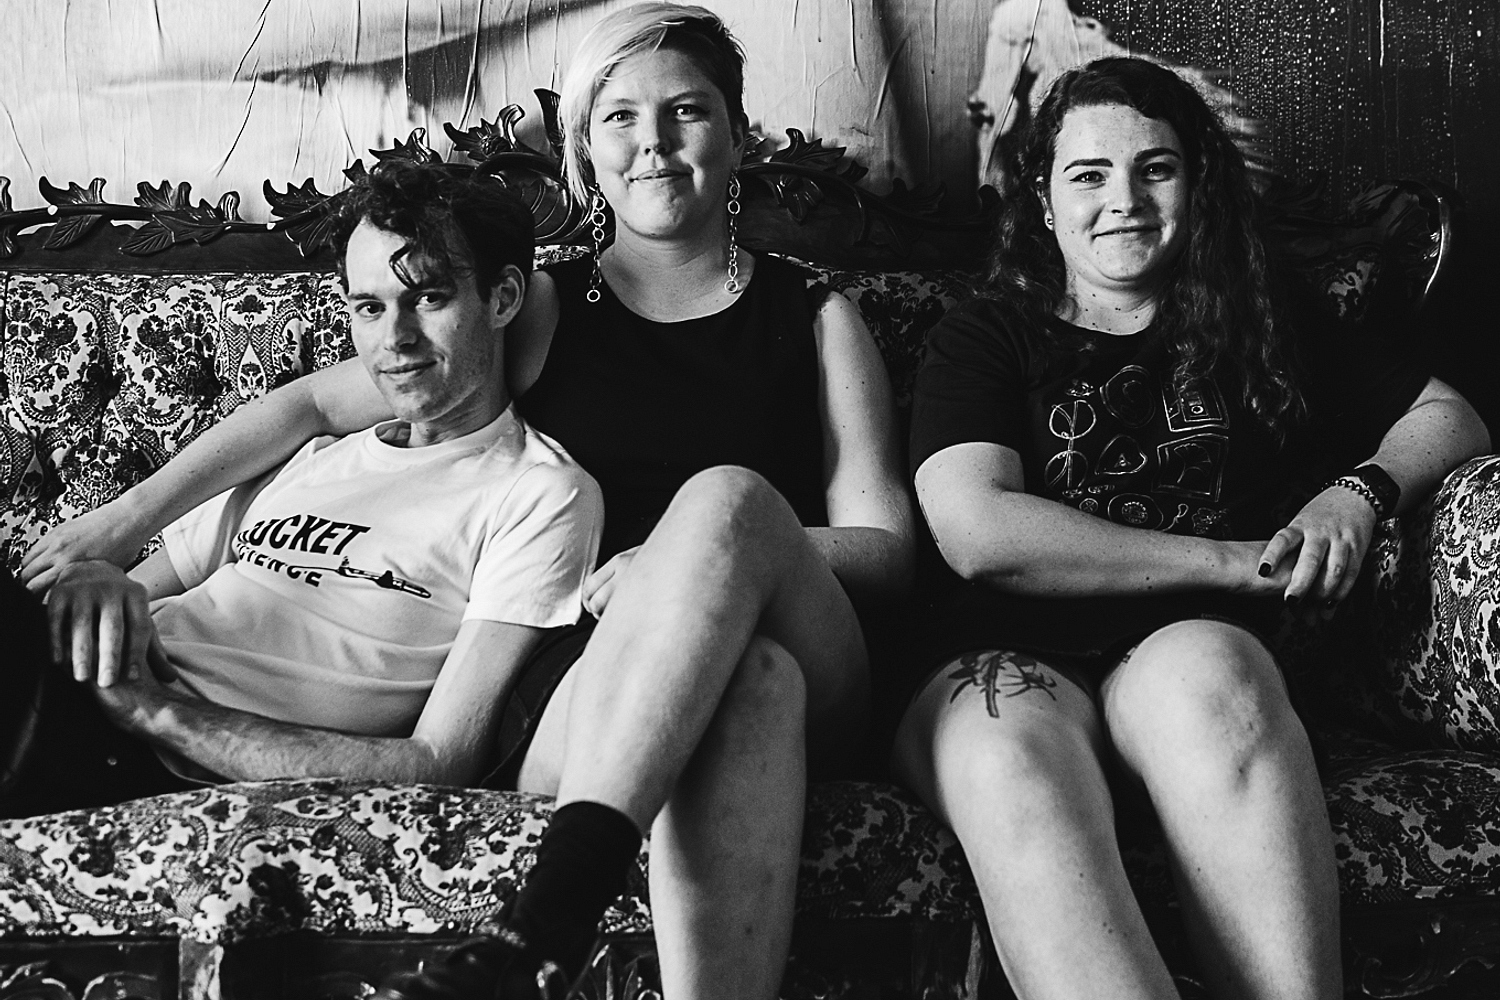 Melbourne’s Cable Ties rumble into action on ‘Choking to Choose’